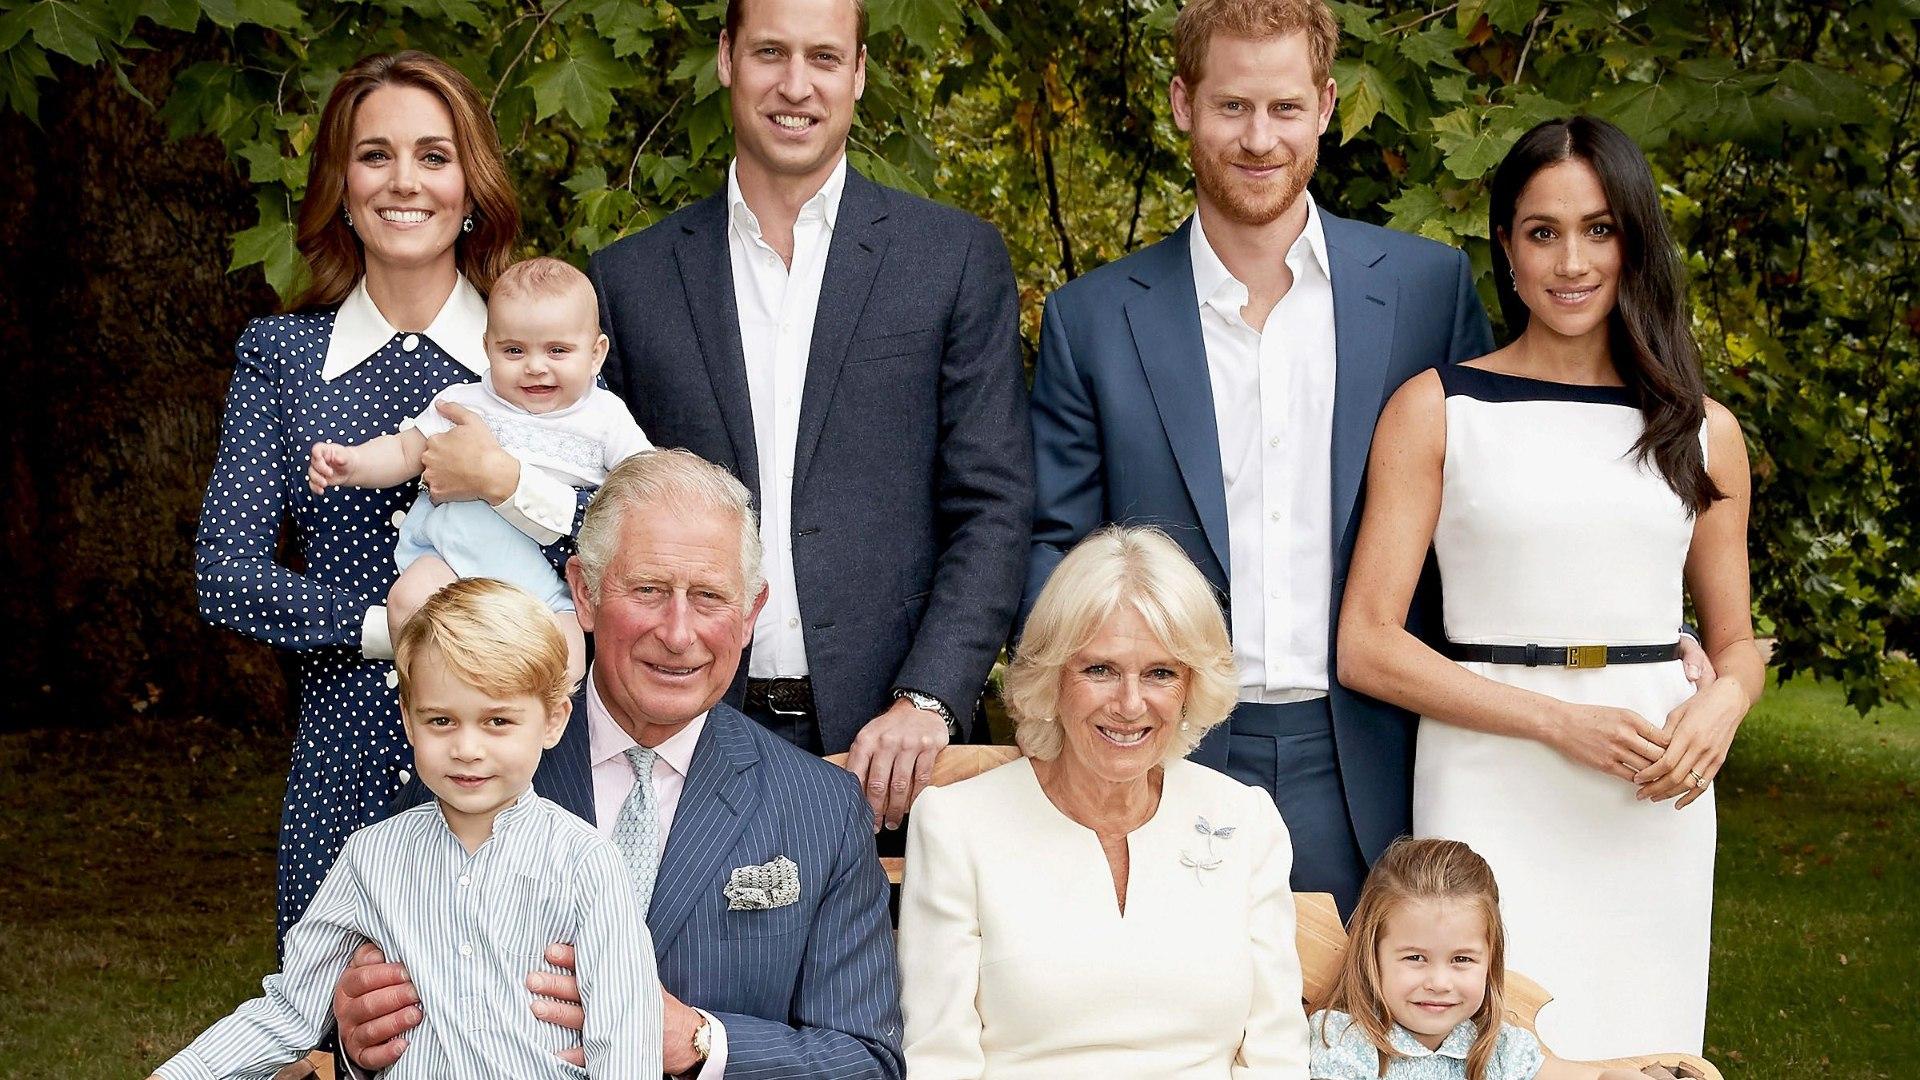 A professional face reader decodes the new royal family photo